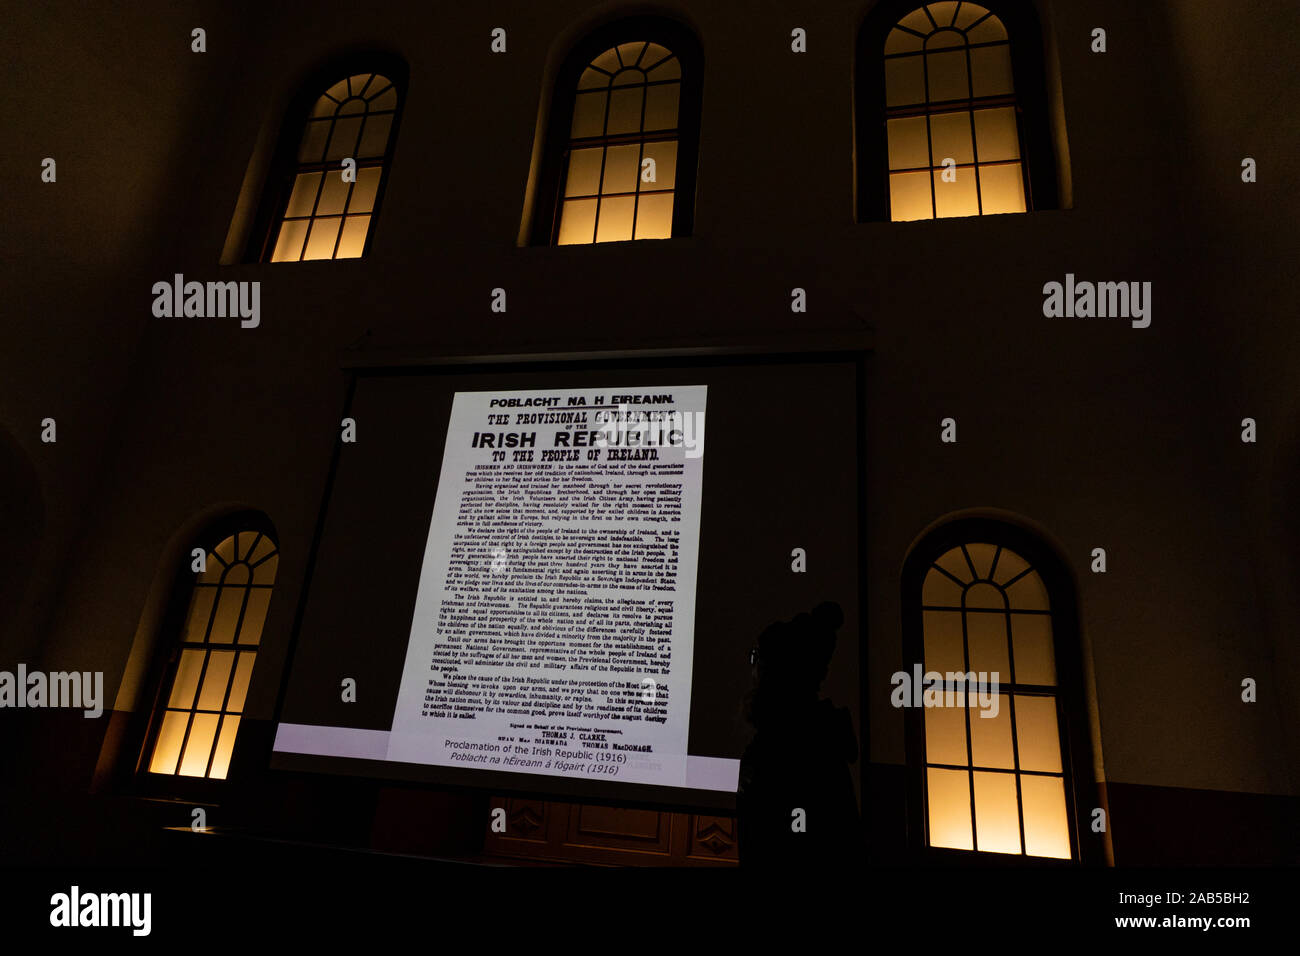 Projection of the Proclomation of The Republic as published in 1916, shown as part of an audio visual show in Kilmainham gaol museum, Dublin, Ireland Stock Photo